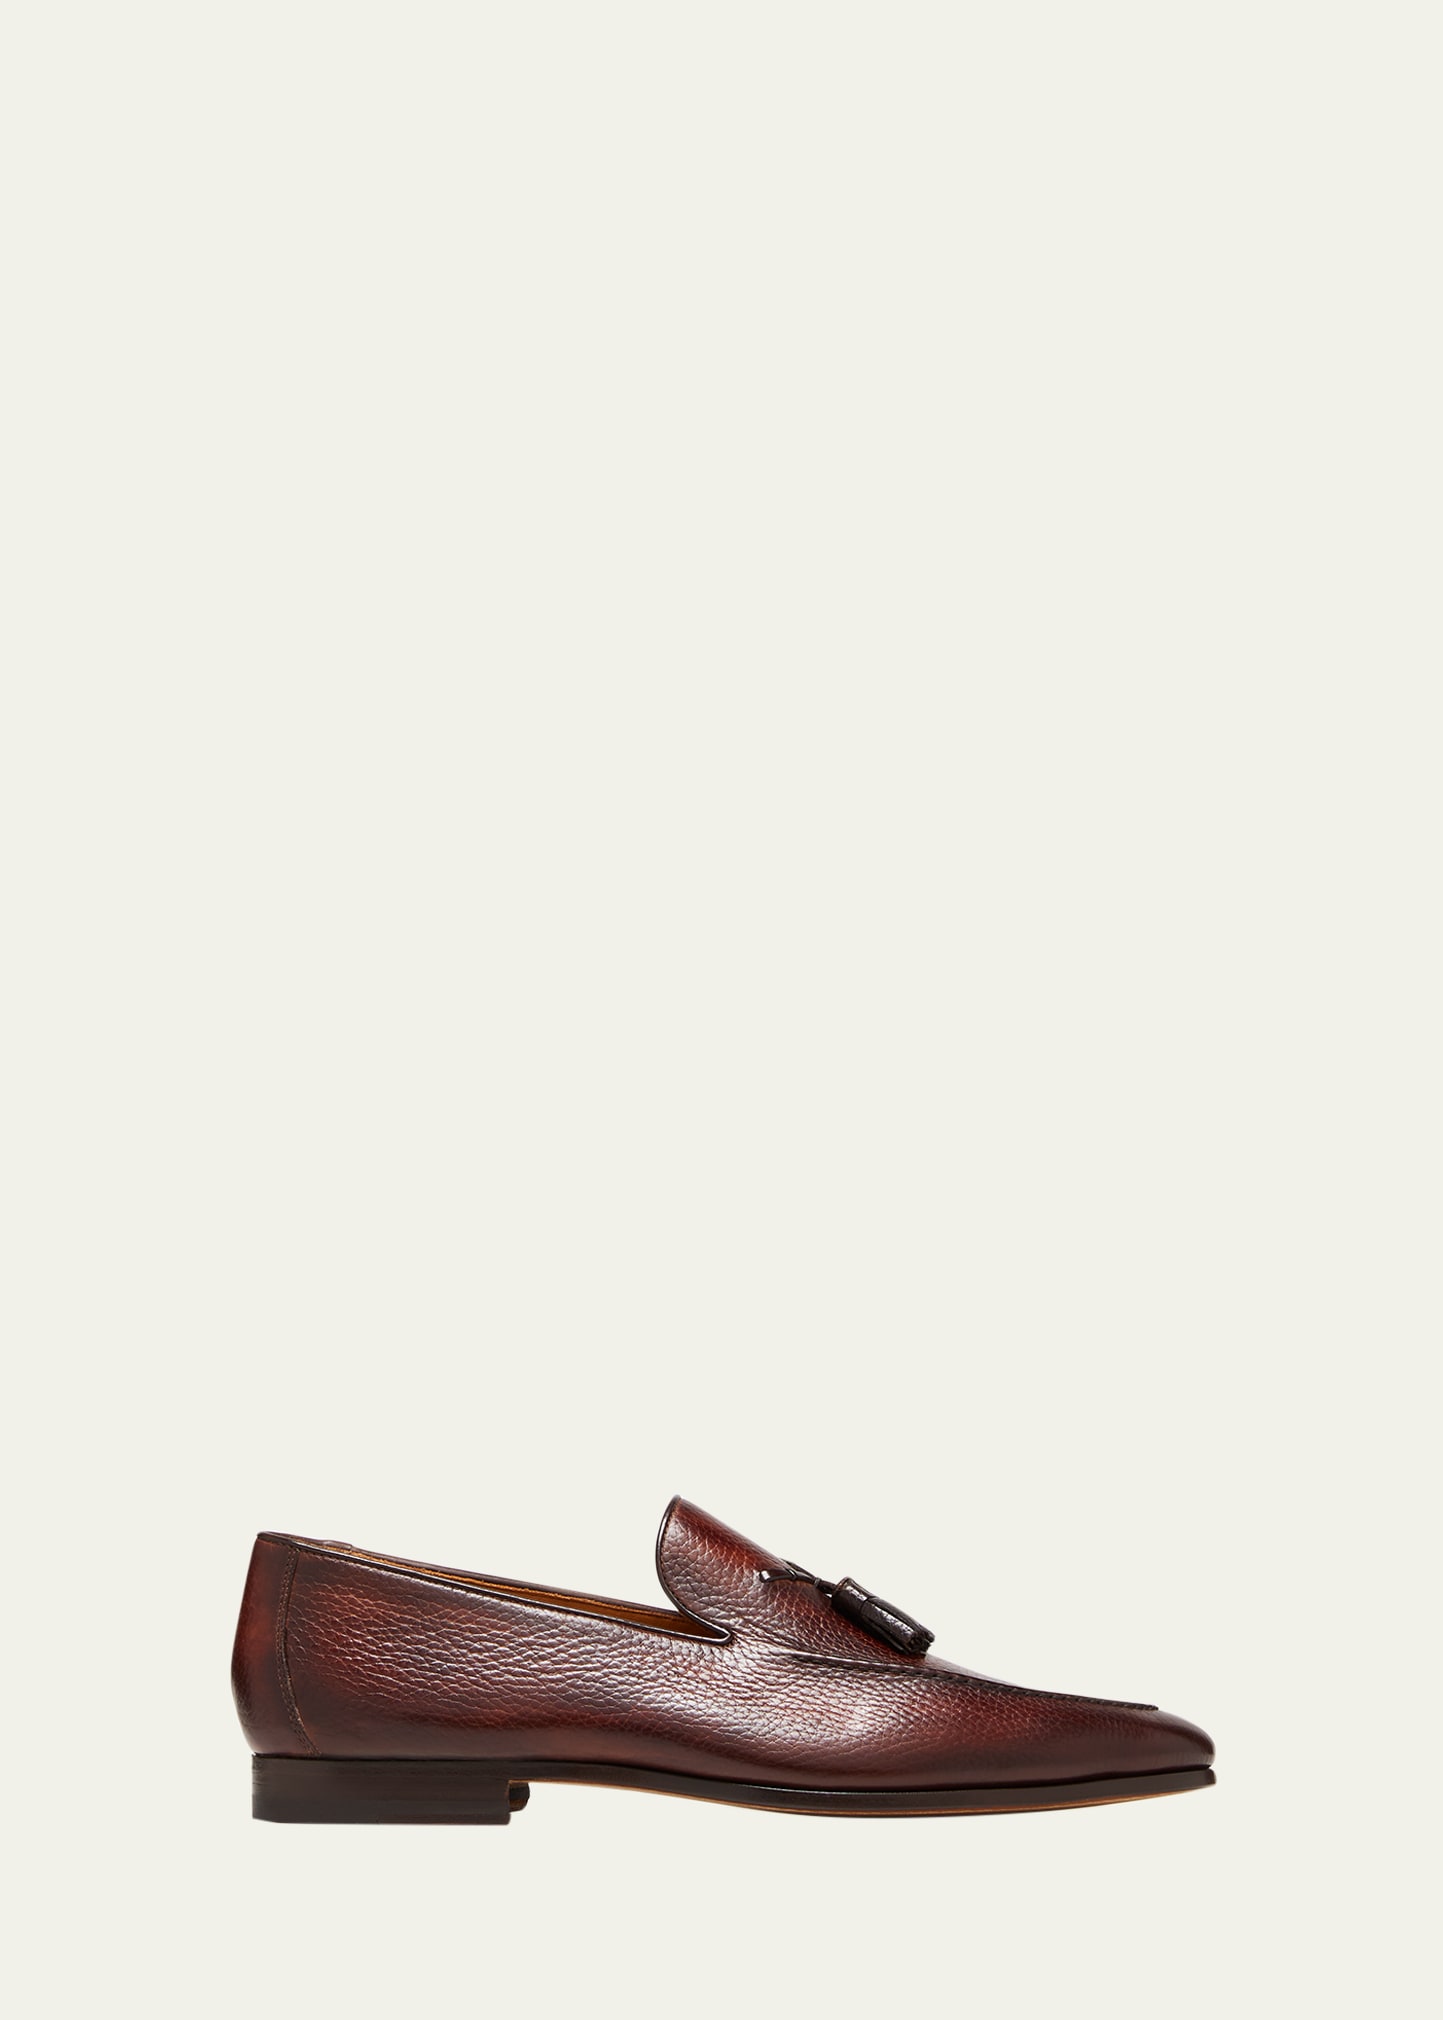 Magnanni Men's Seneca Grained Leather Tassel Loafers In Midbrown